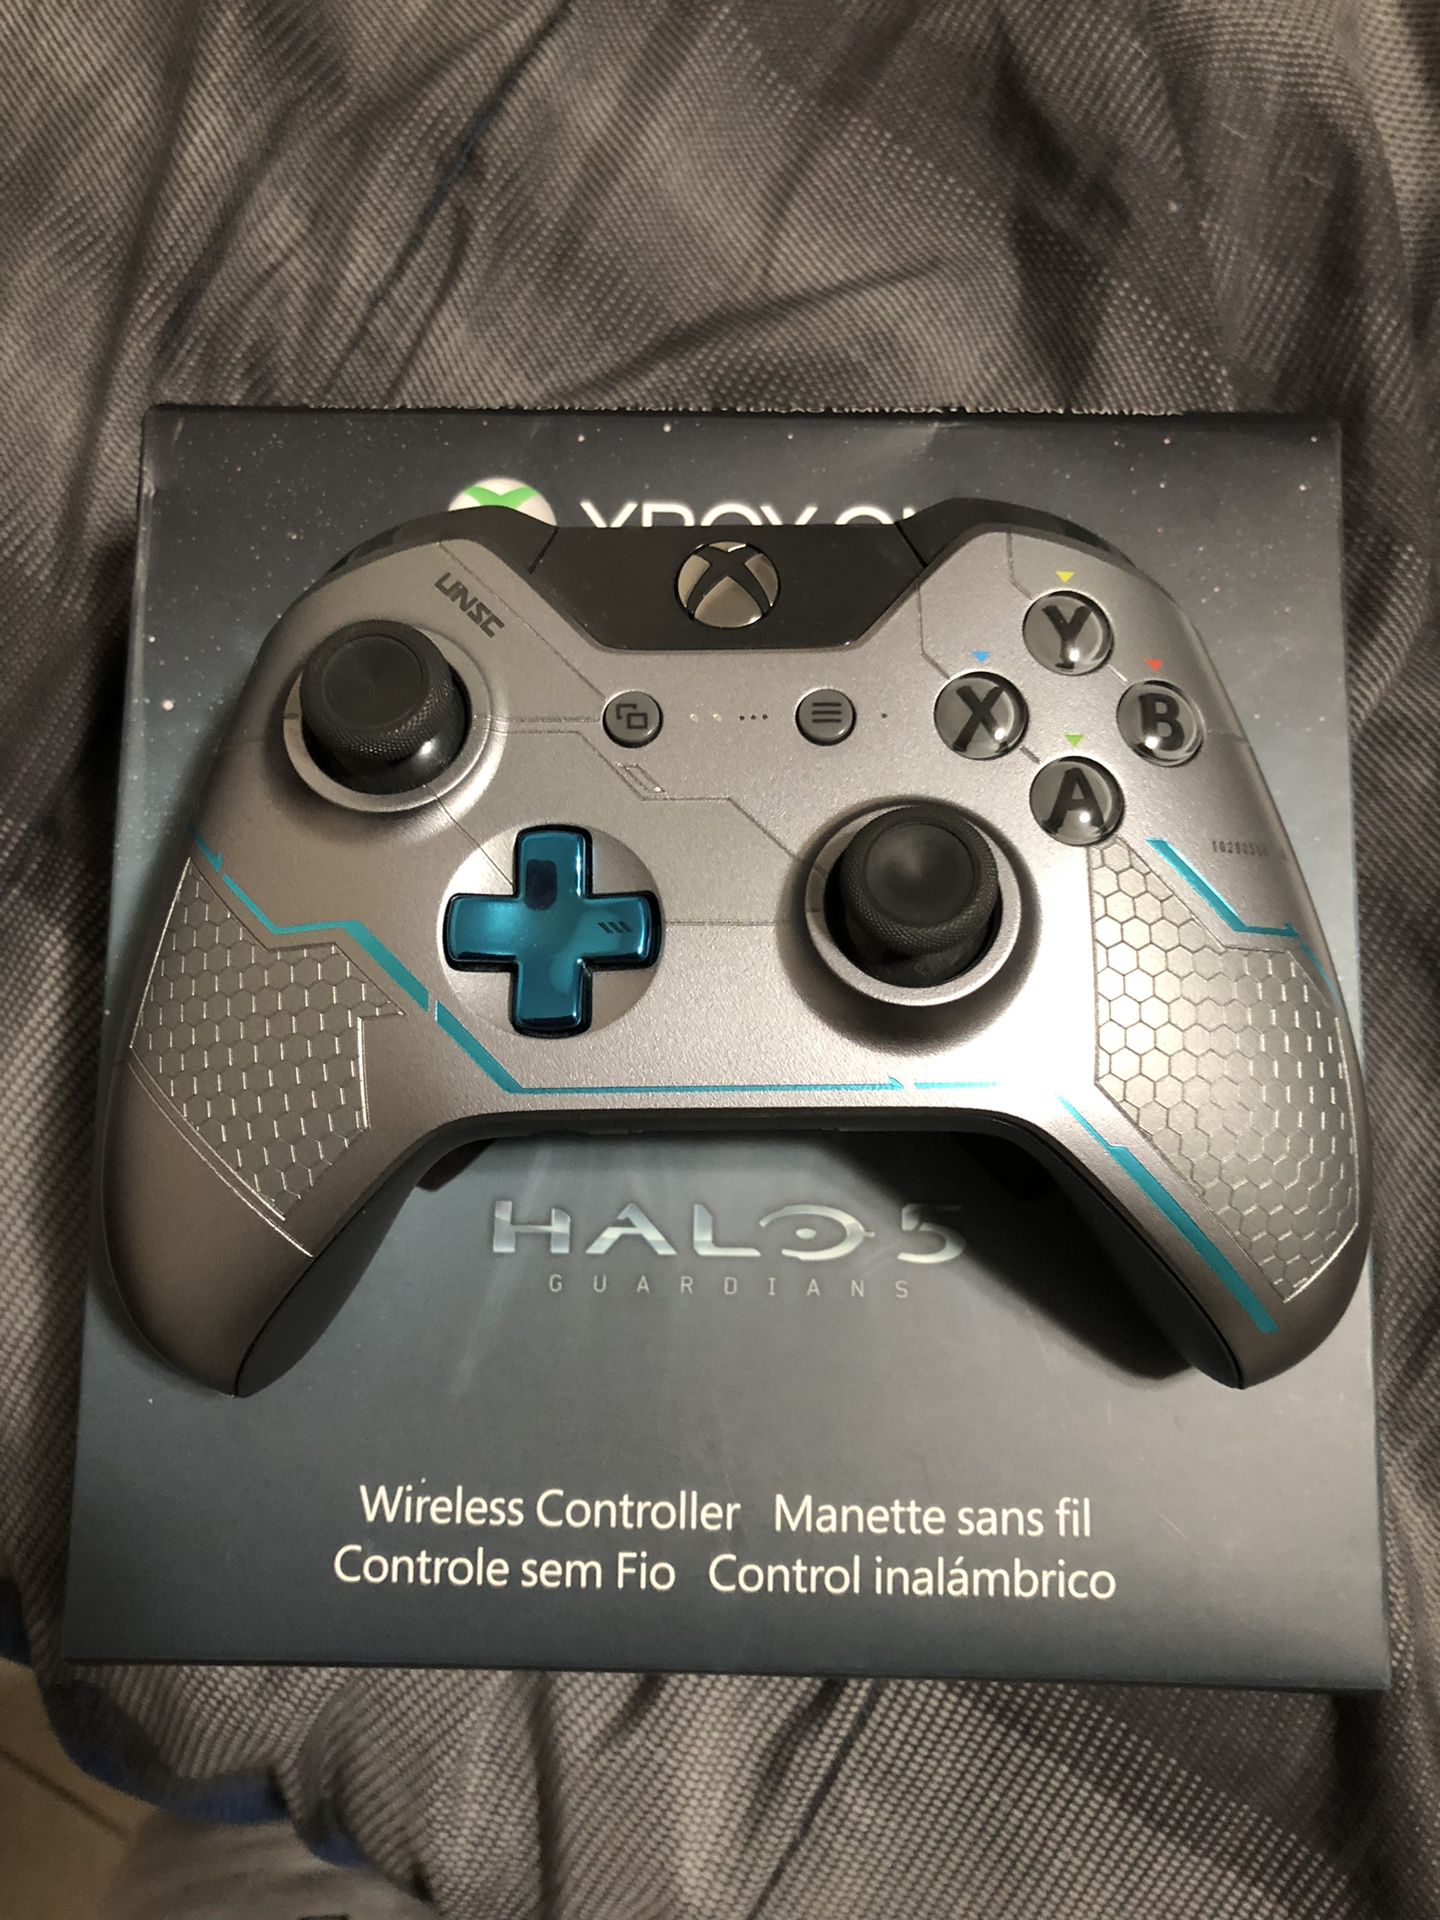 Halo 5 limited edition controller with game